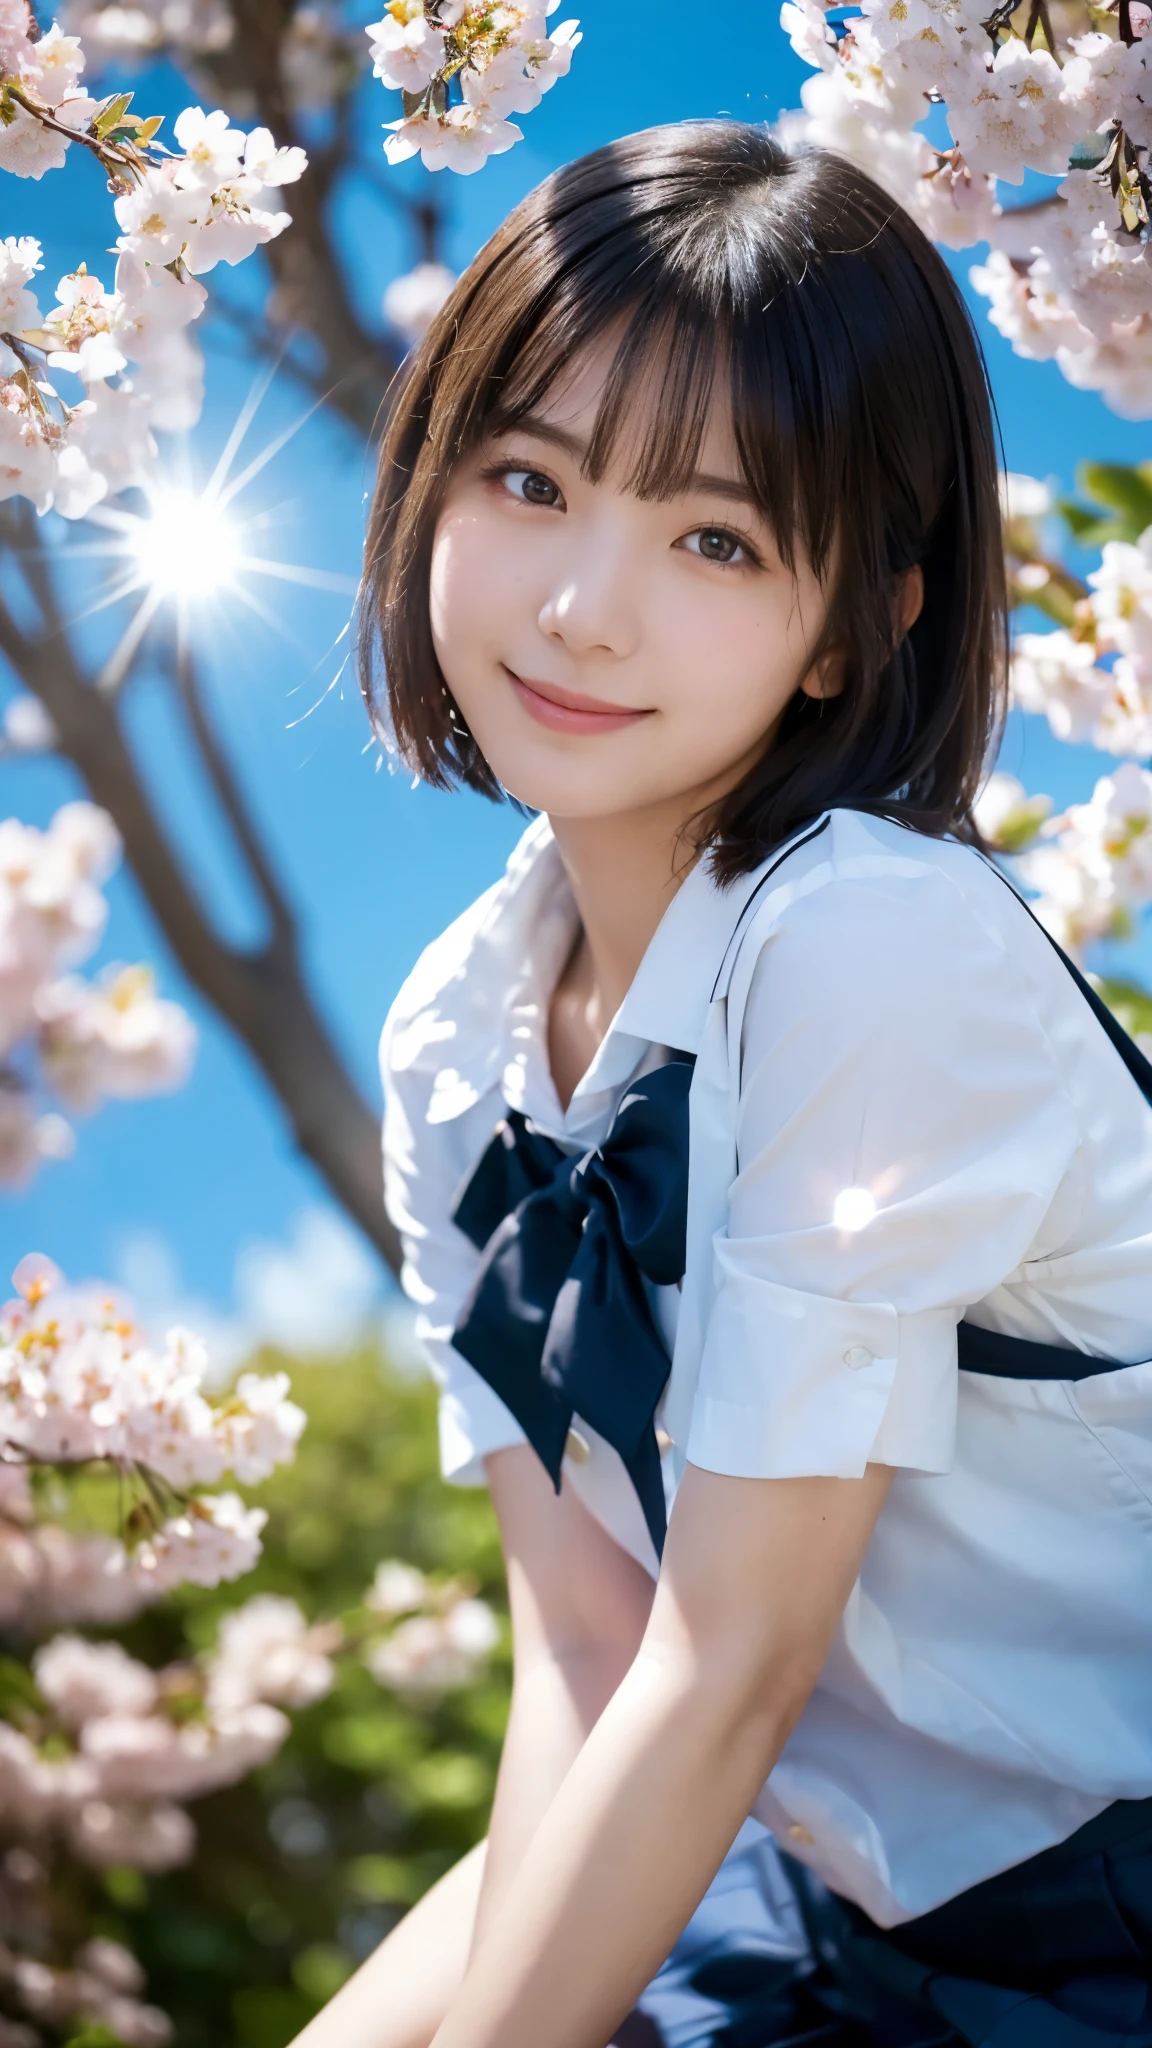 (highest quality,masterpiece:1.3,ultra high resolution),(Super detailed,caustics,8k),(photorealistic:1.4,RAW shooting),1 girl,sit,(smile),(looking down at the camera),18-year-old,cute,Japanese,black hair short cut,(school uniform),glamorous,(big ),(breast focus),grass,cherry blossoms,blue sky,sun,Natural light,(Lens flare),professional writing,(bust up shot),(Tilt composition:1.3),(low position:1.4),(Low - Angle:1.4)